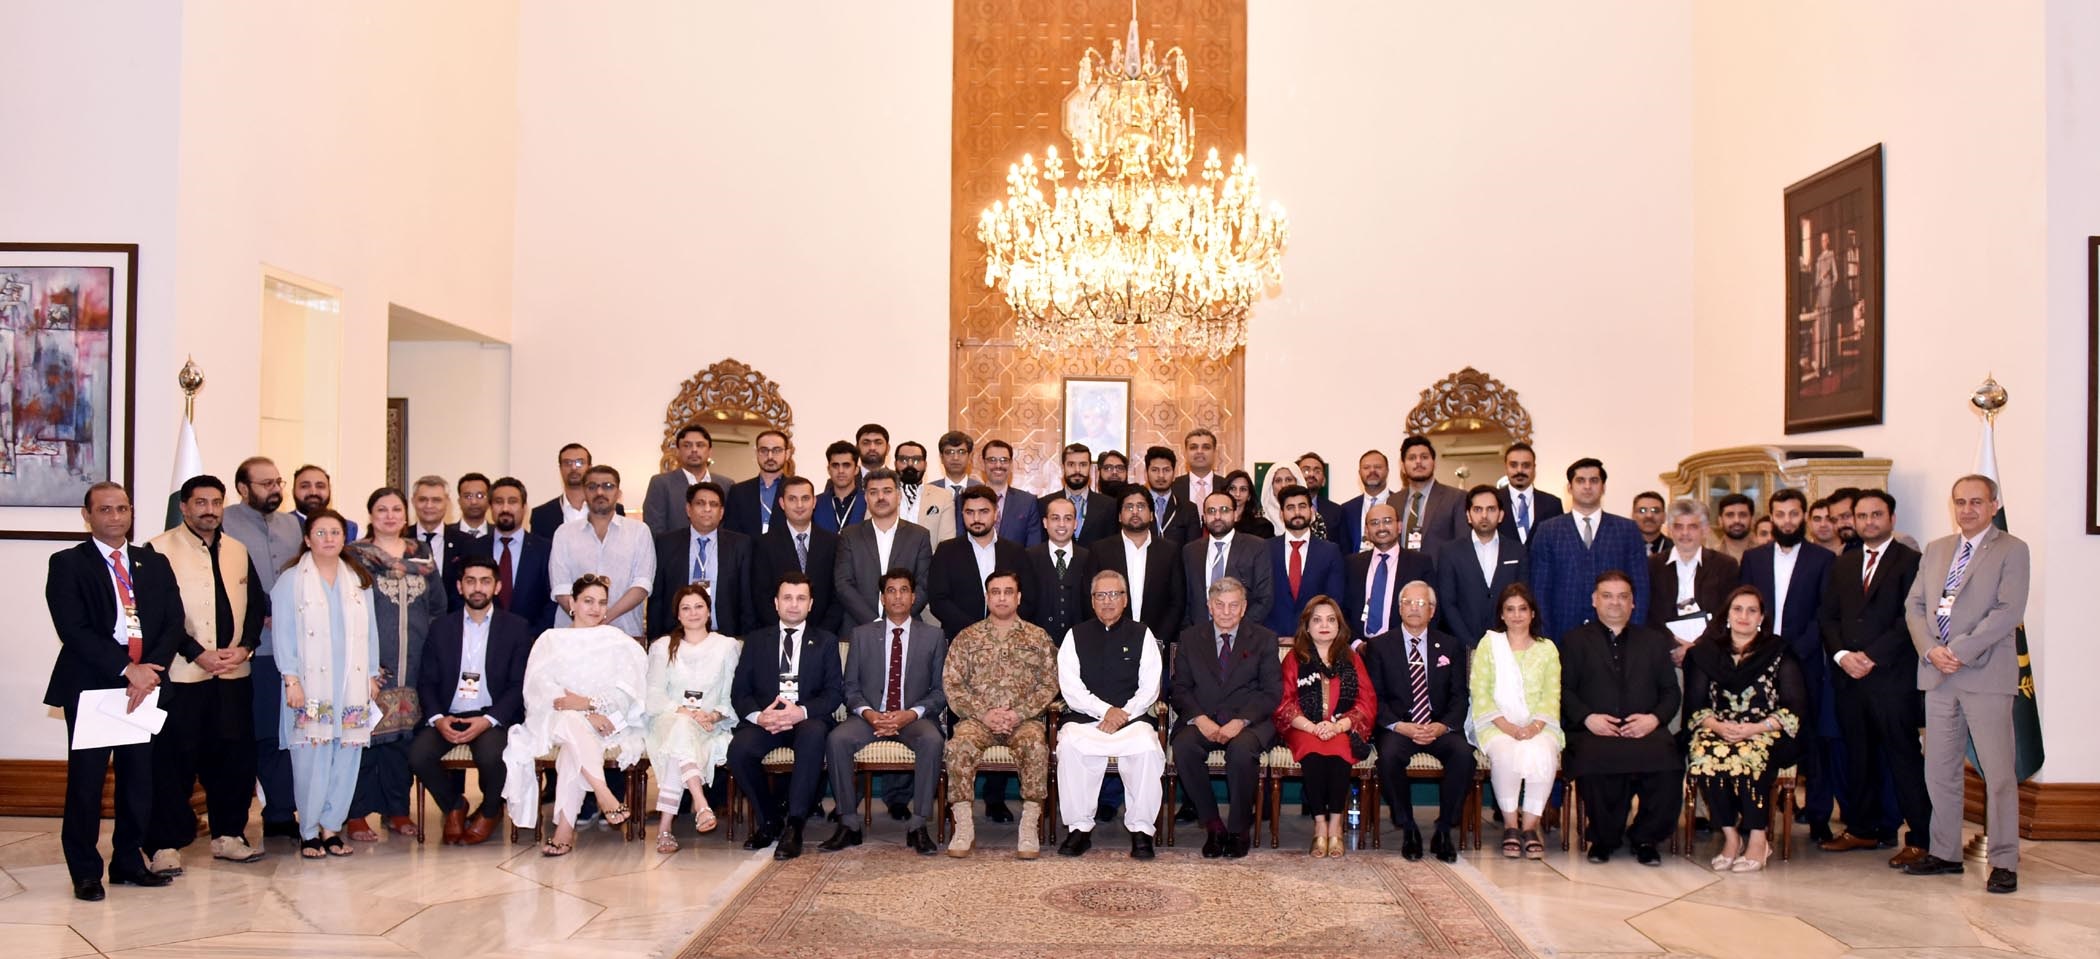 PRESIDENT DR. ARIF ALVI IN A GROUP PHOTO WITH A DELEGATION OF INTERNATIONAL CPEC WORKSHOP ORGANIZED BY NDU AT AIWAN-E-SADR, ISLAMABAD ON APRIL 18, 2019.